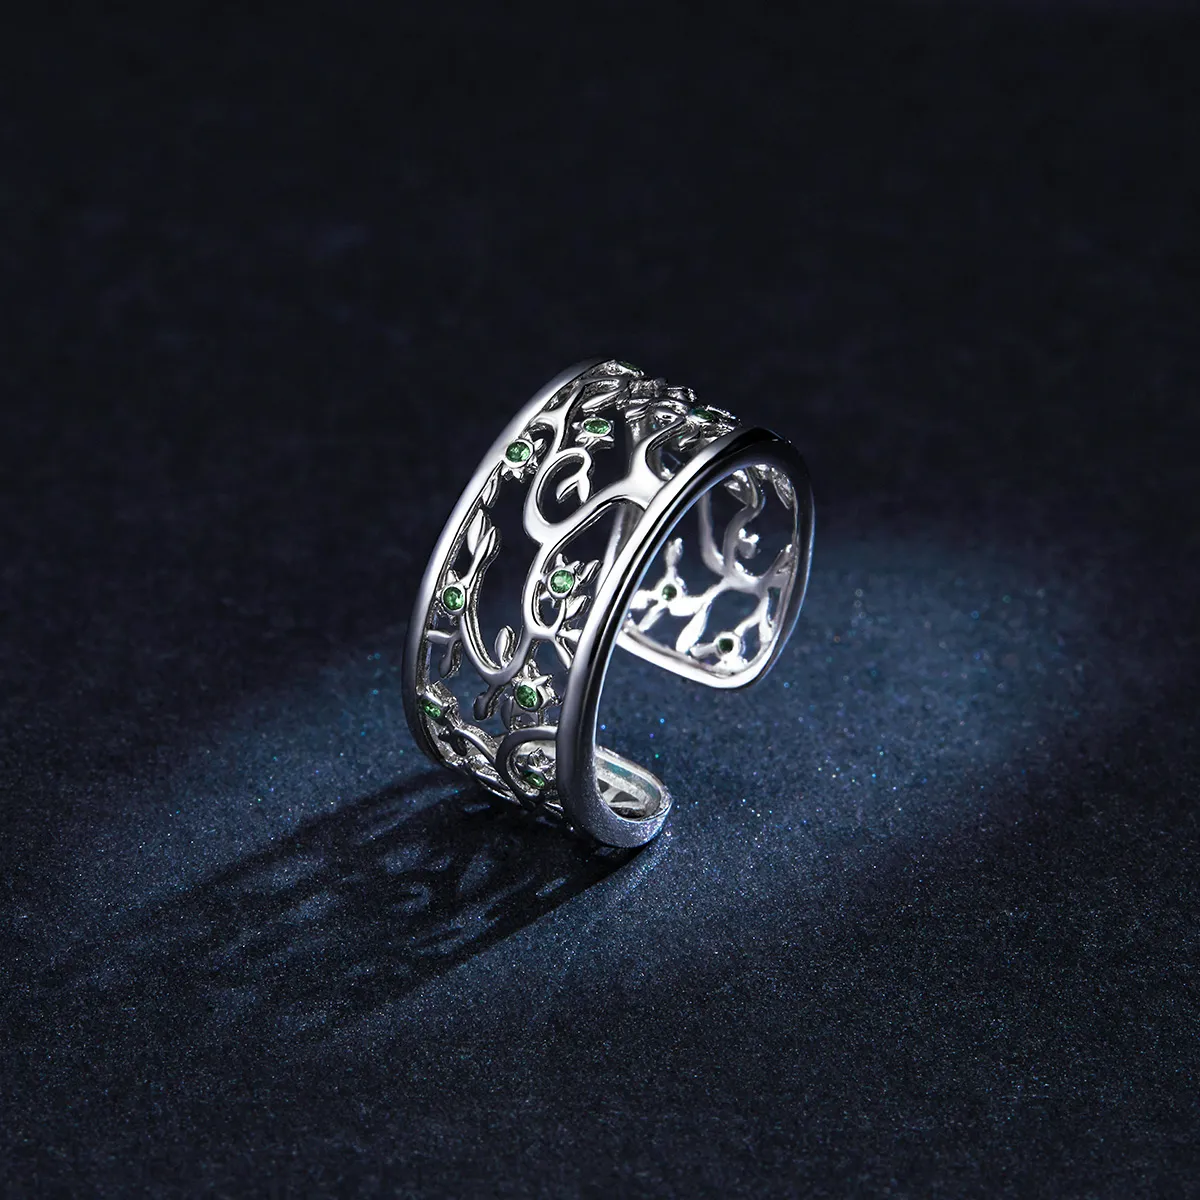 Pandora Style Silver Tree of Life Open Ring - BSR125